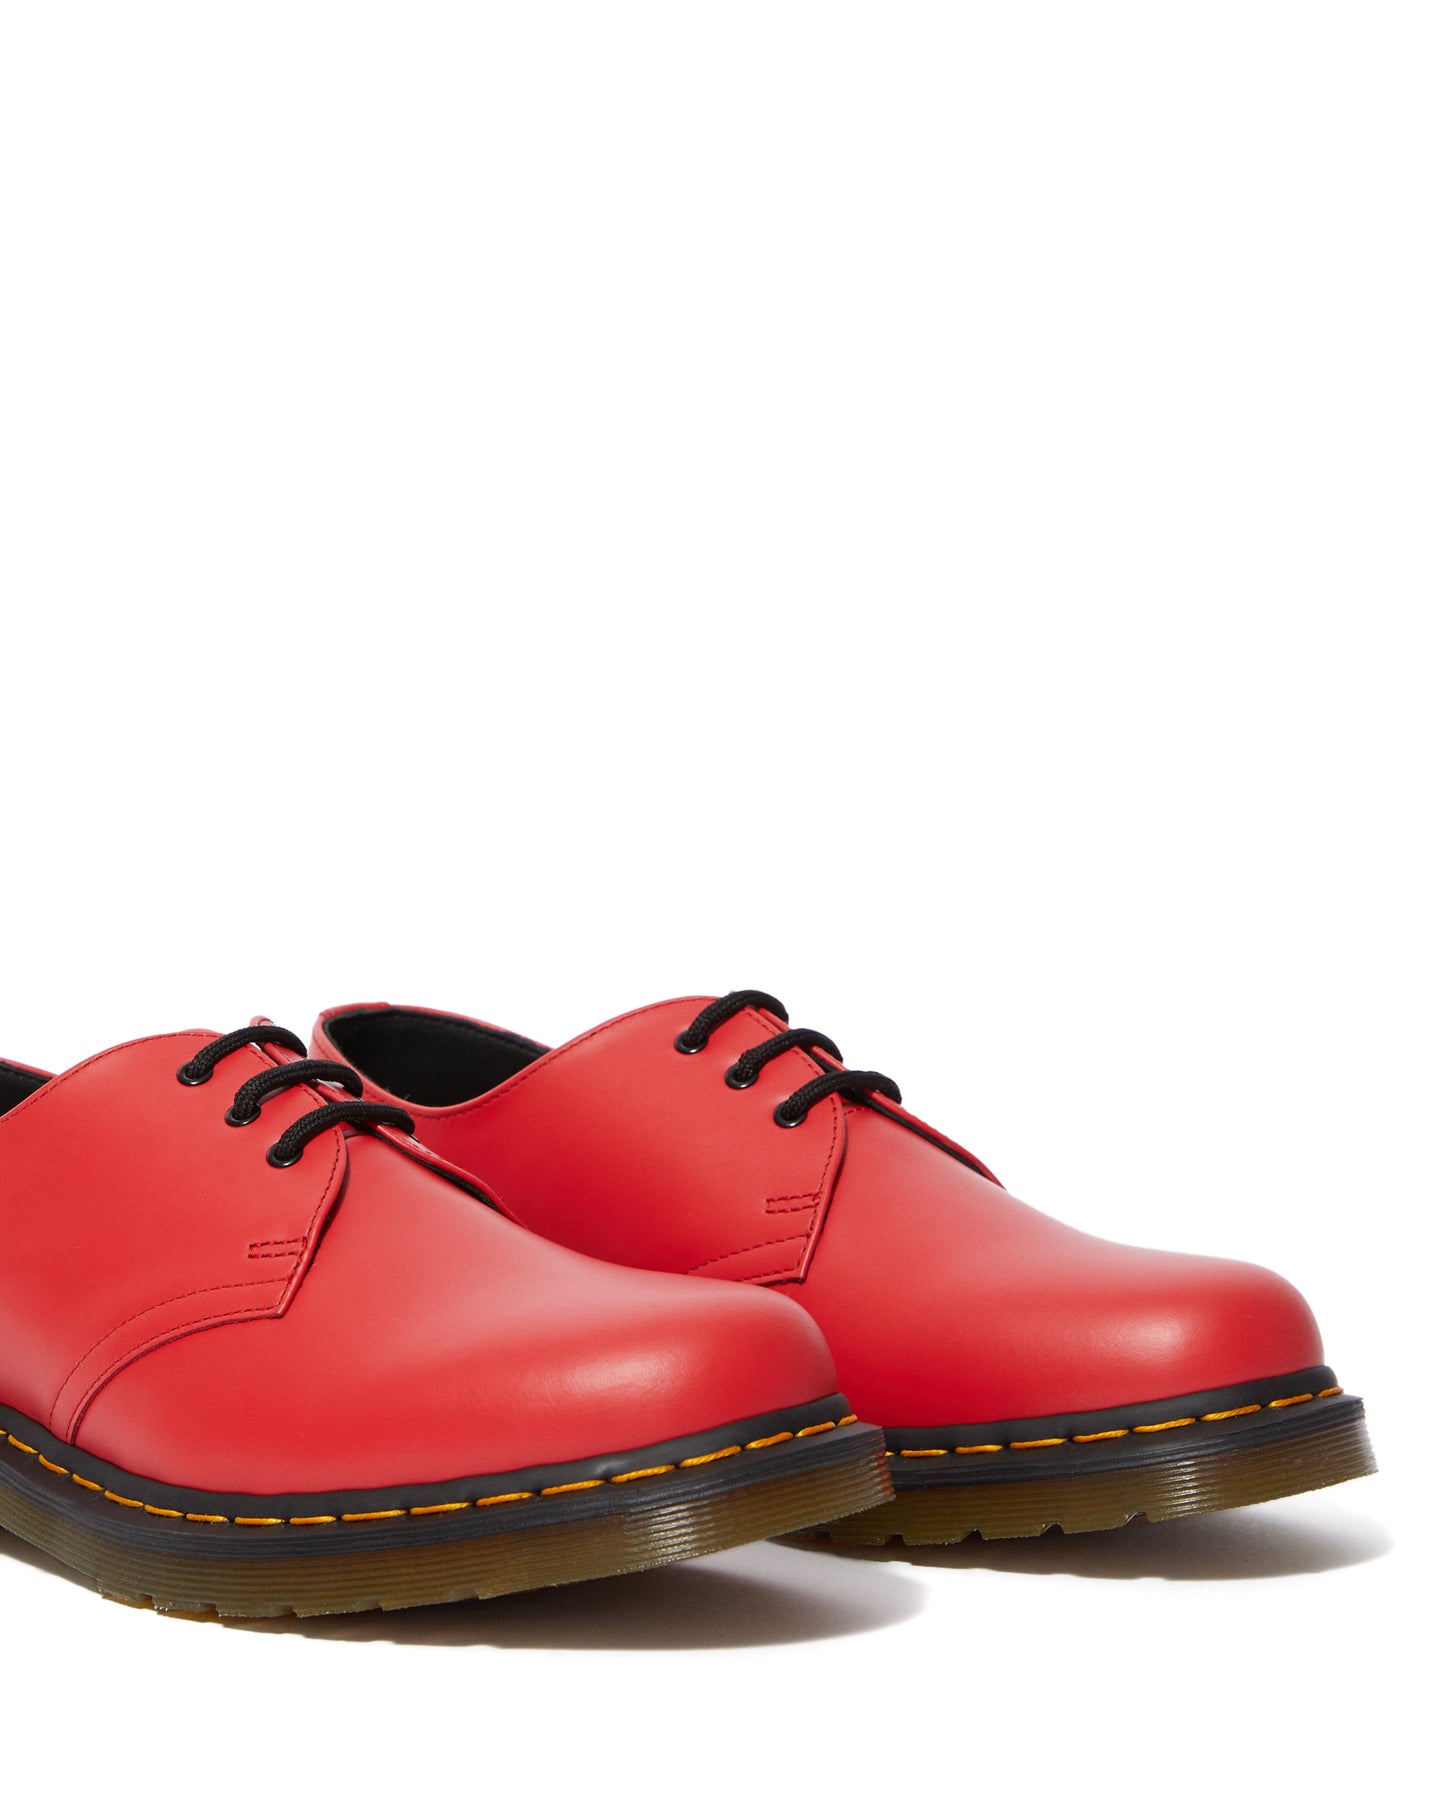 1461 SATCHEL RED OXFORD SHOE